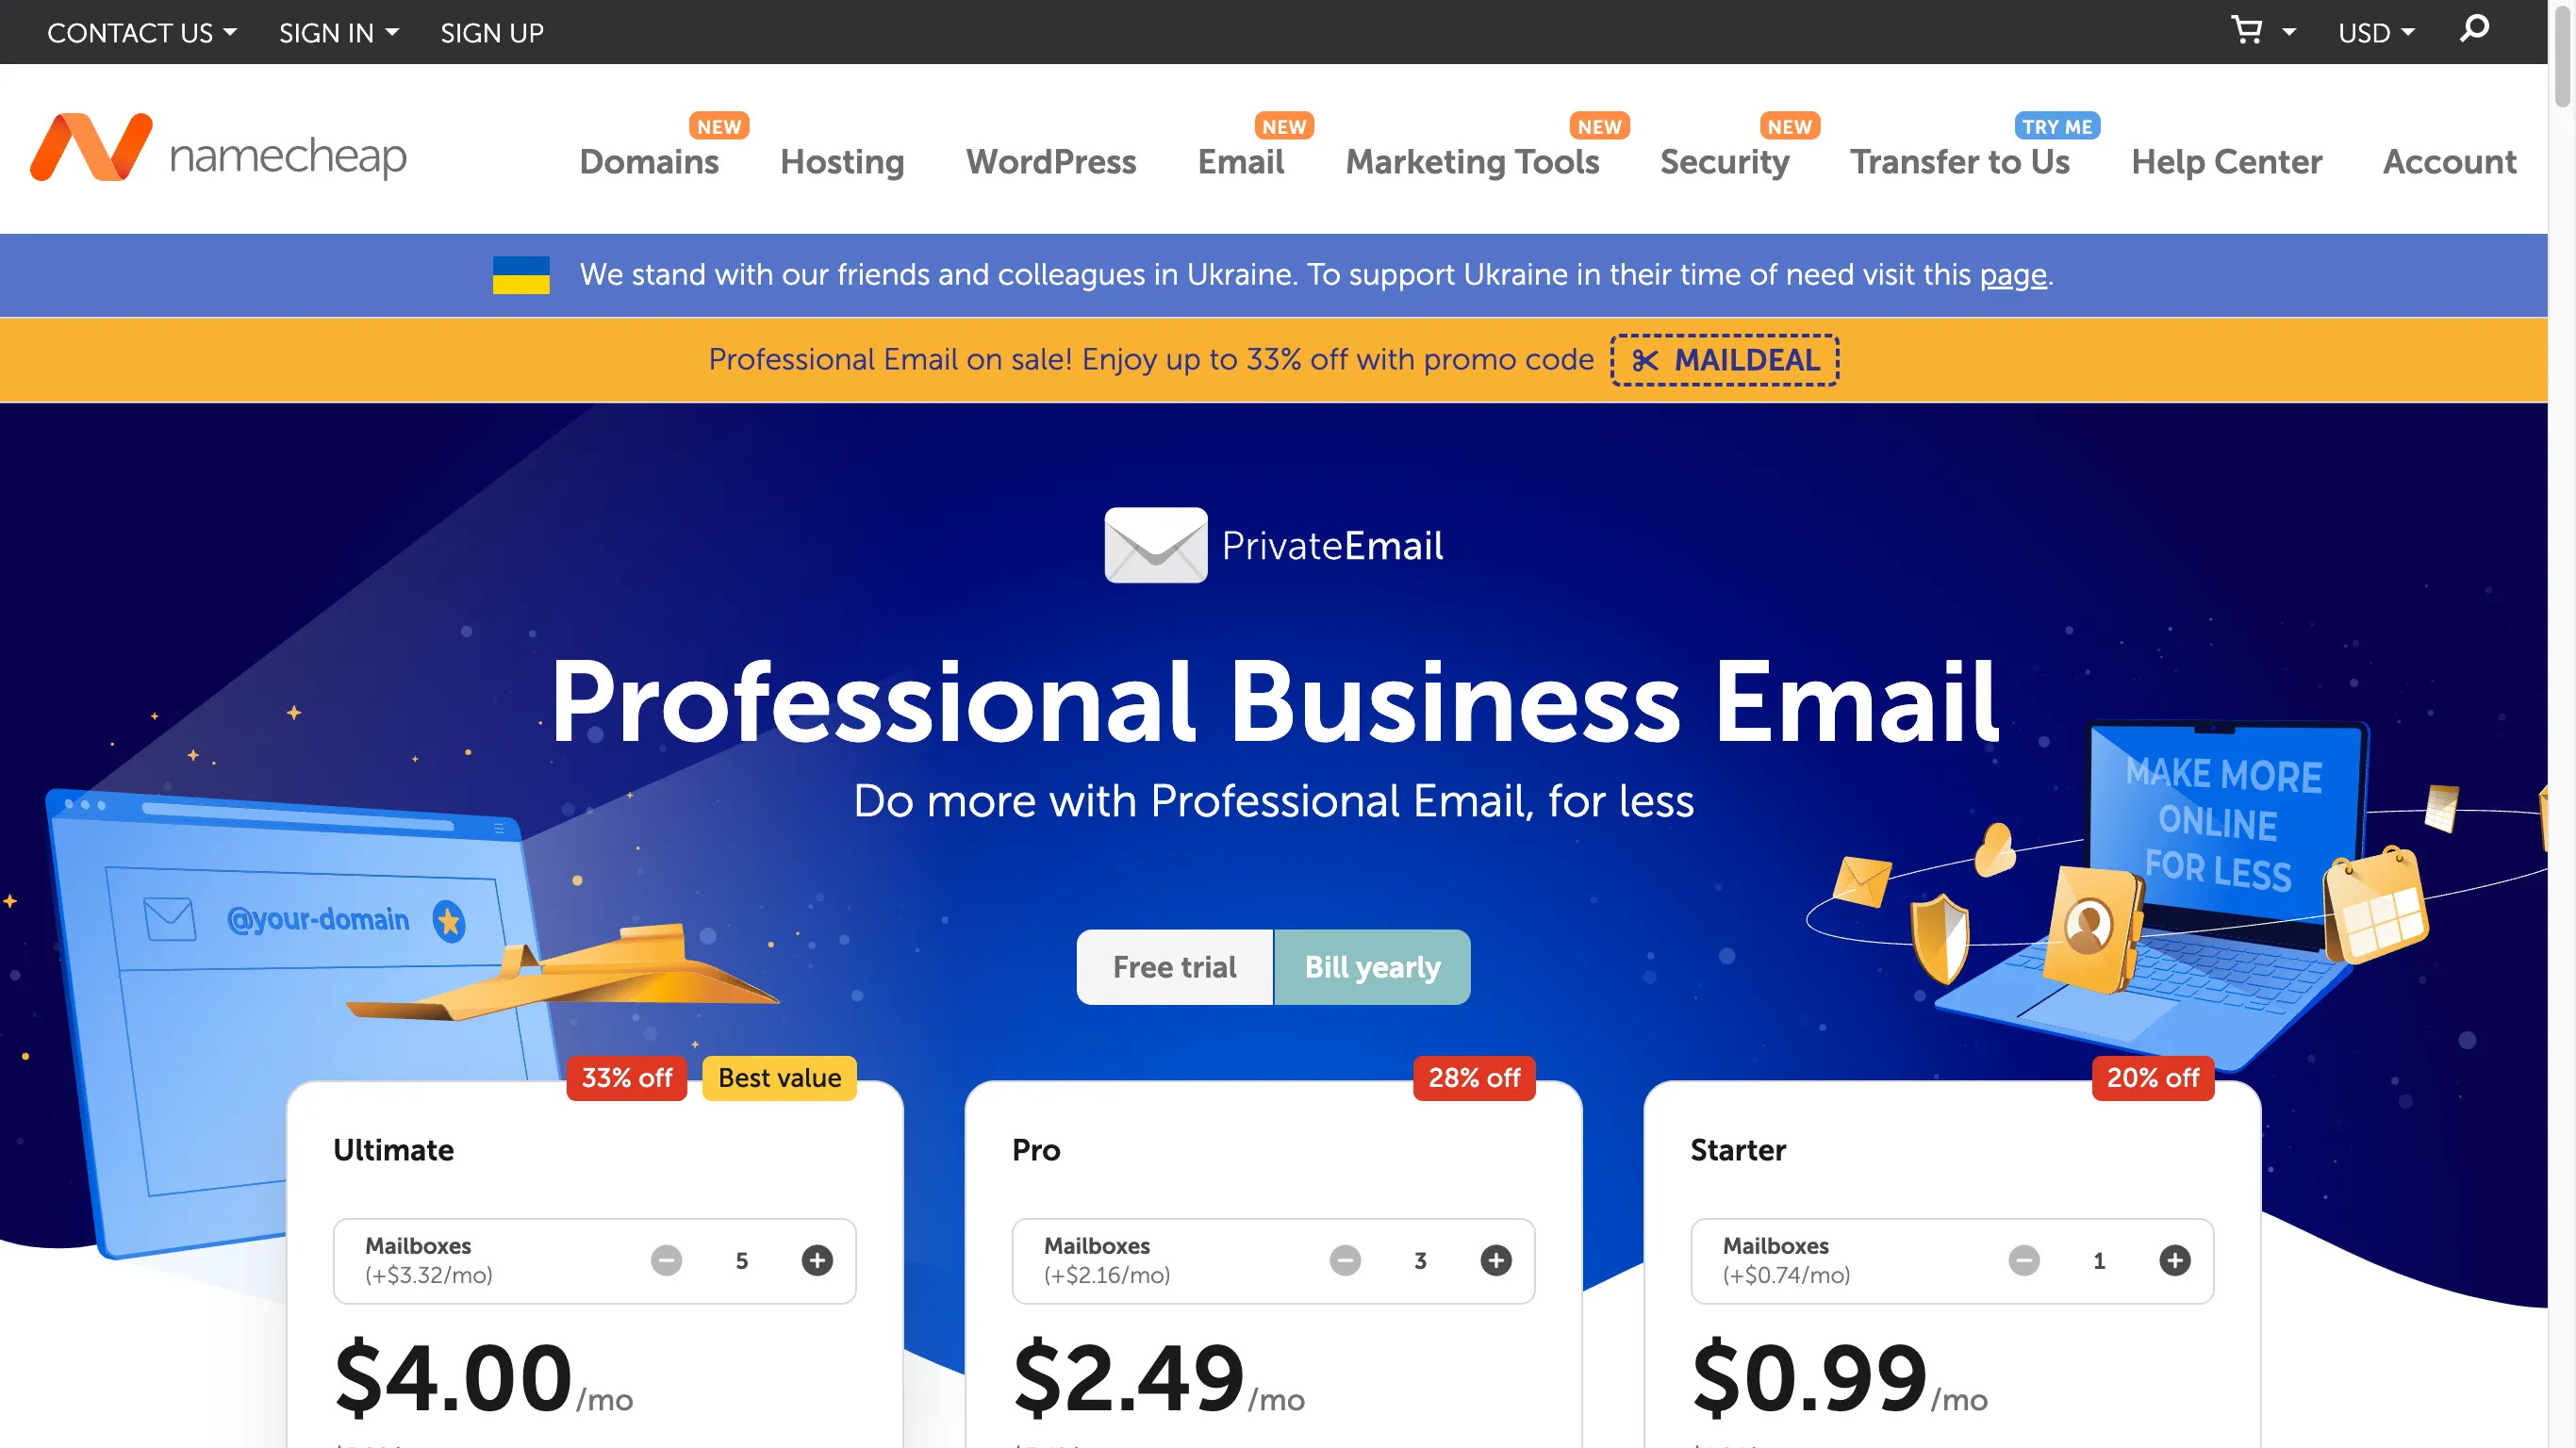 Namecheap is a closed-source email service.